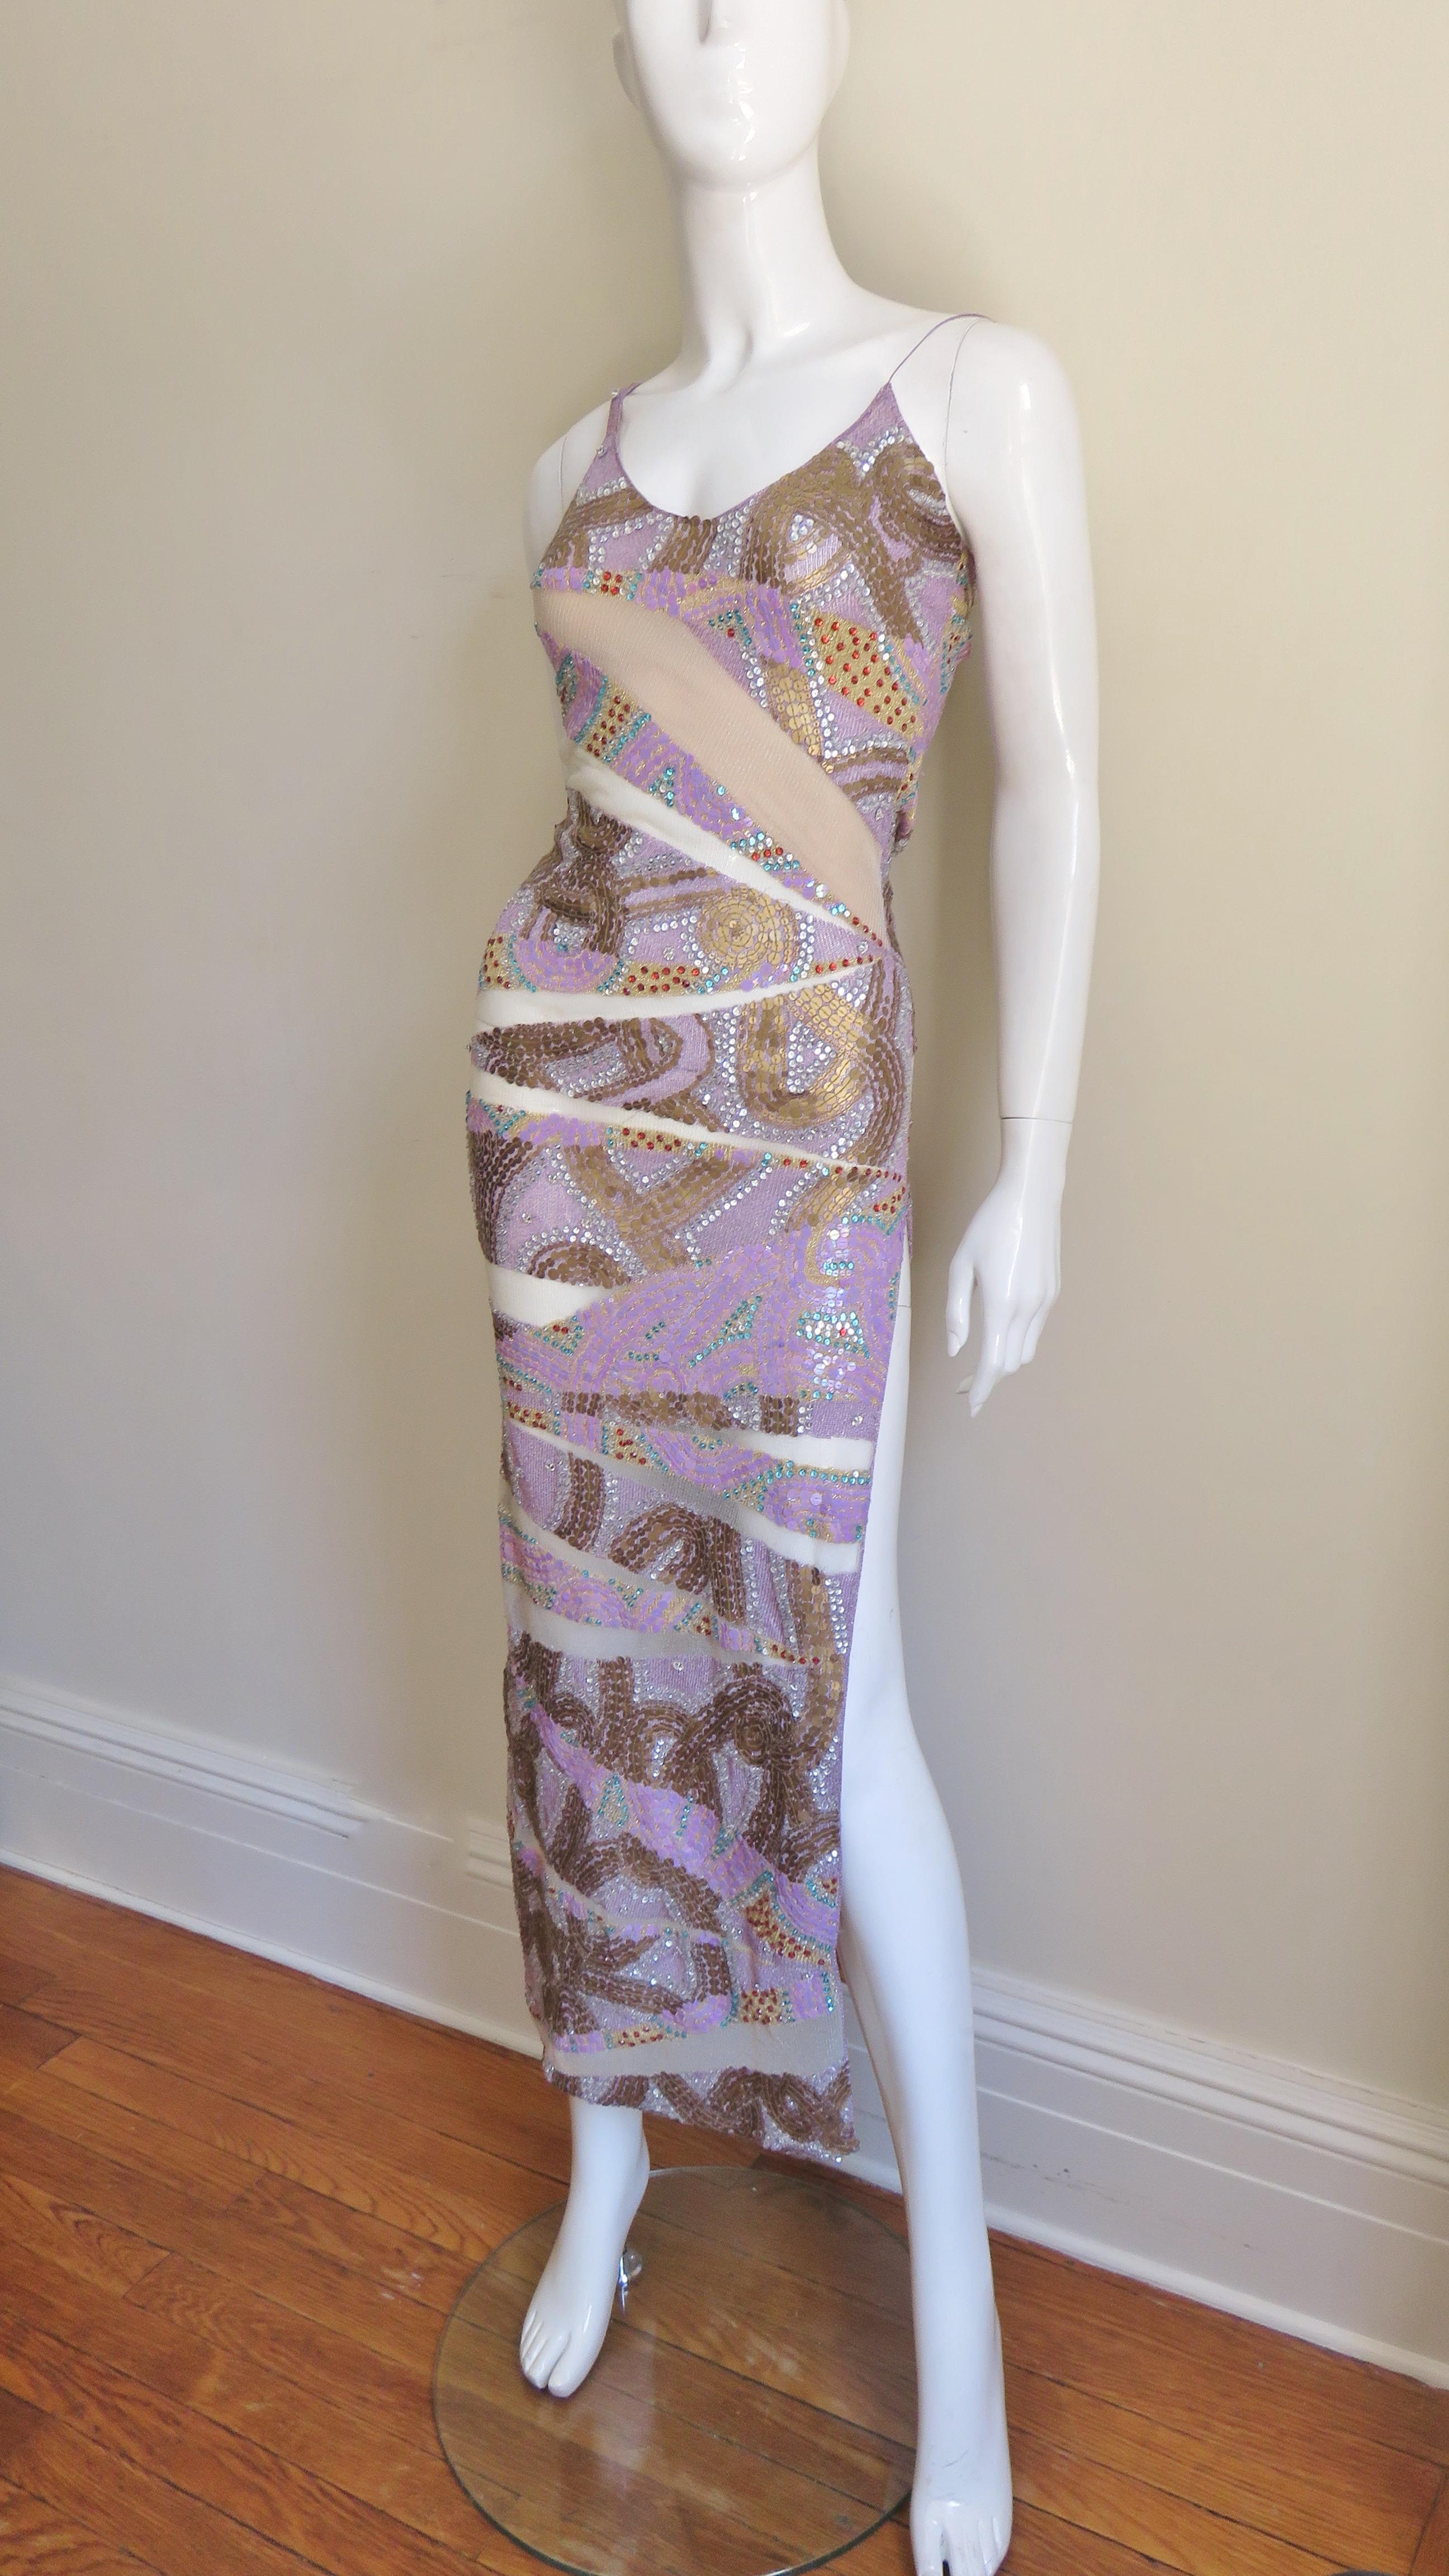 A beautiful bodycon dress from Julien MacDonald.  It is fitted through the hips then flares slightly to the hem which has a side slit.  The bodice has a spaghetti strap and a larger strap. The dress has alternating wedges of lilac and gold sequins